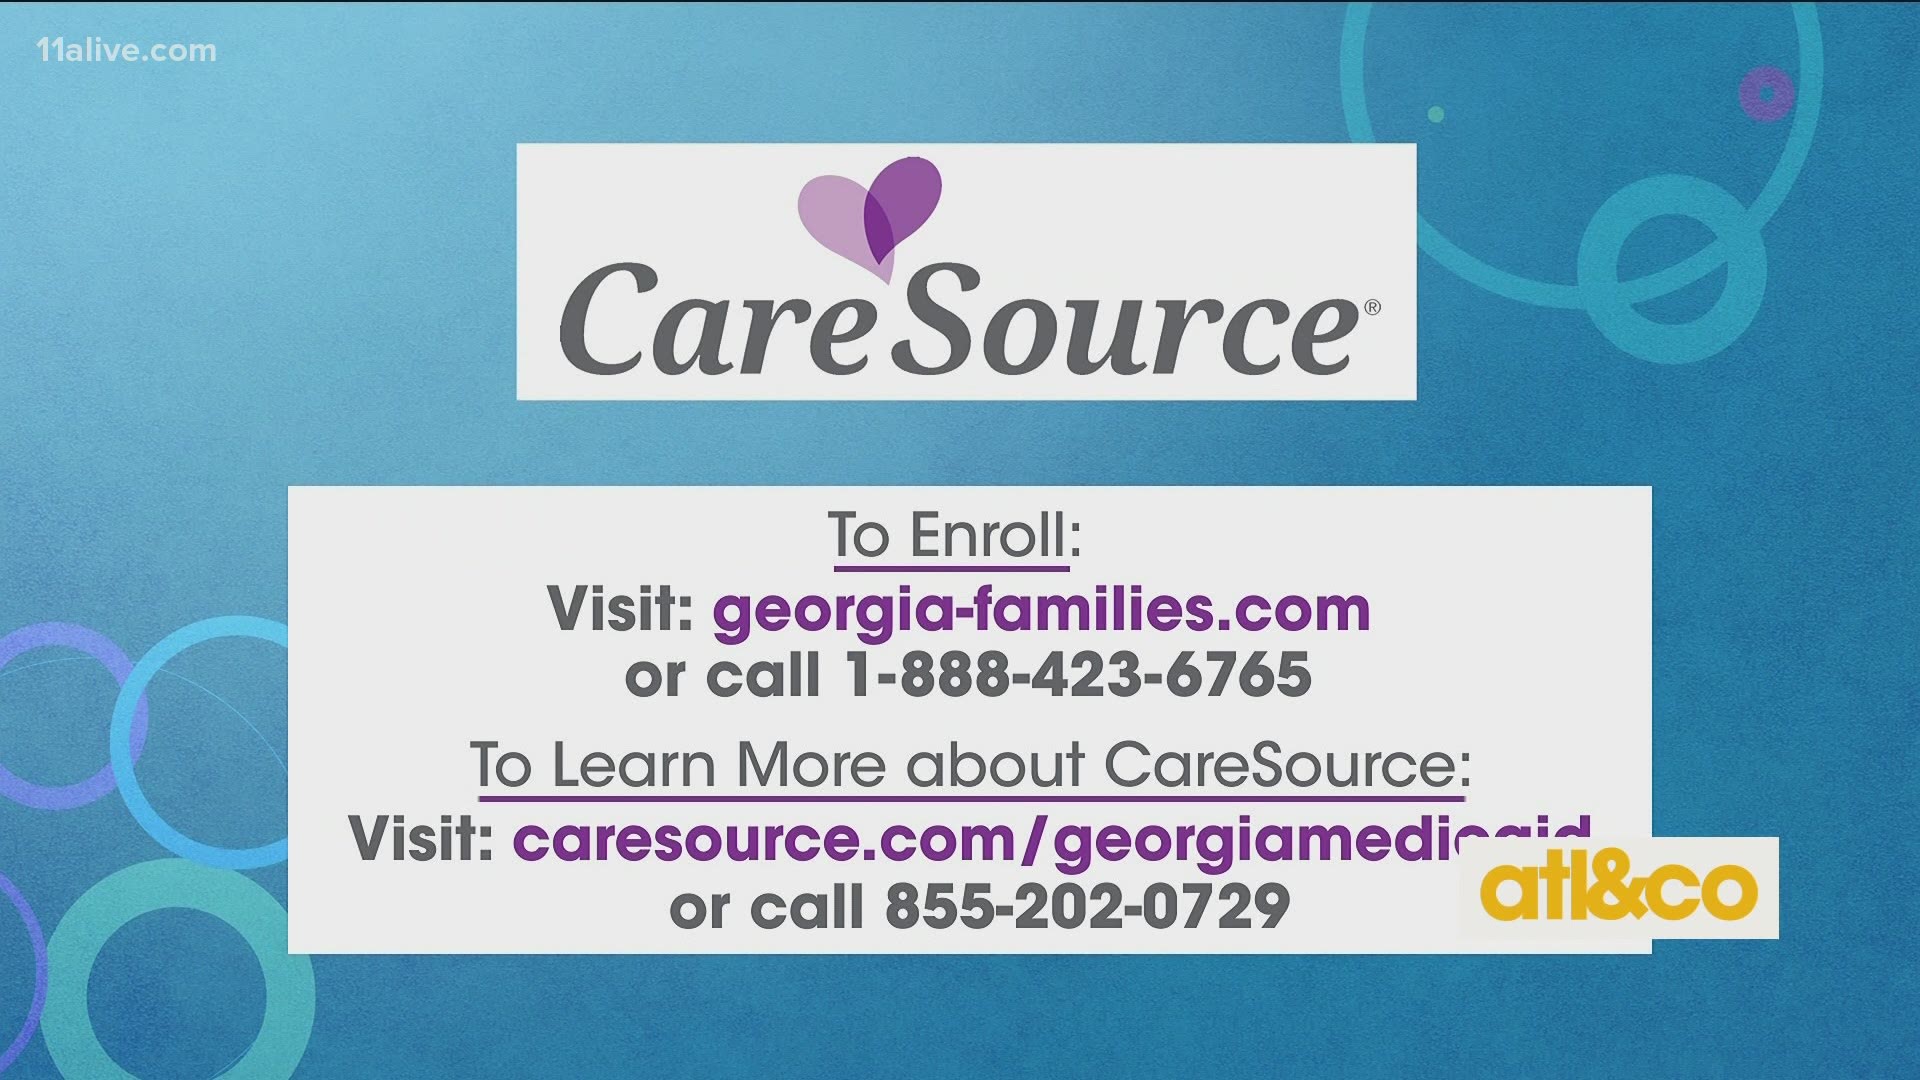 Caresource ga help major healthcare changes under affordable care act